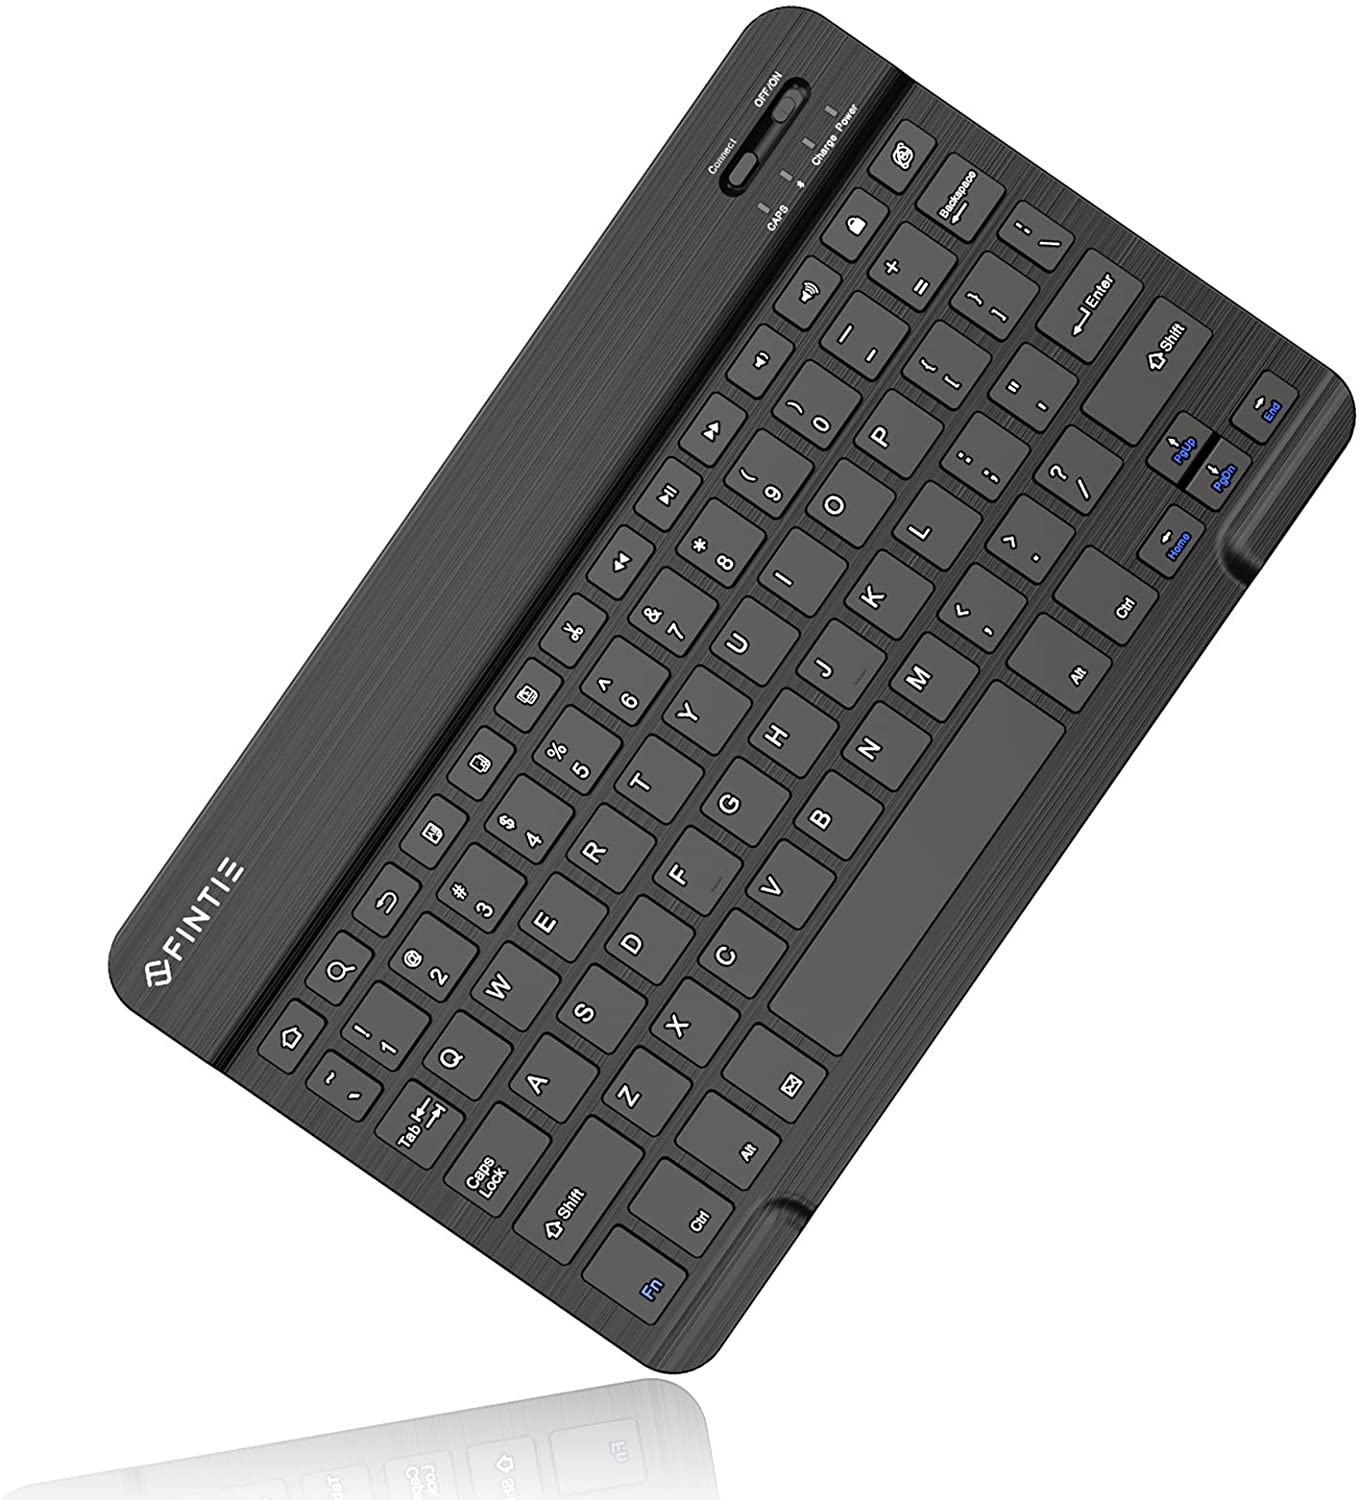 Fintie 7-Inch Ultrathin (4mm) Wireless Bluetooth Keyboard for Android Tablet Samsung Galaxy Tab E/Tab A/Tab S, ASUS, Google Nexus - e4cents